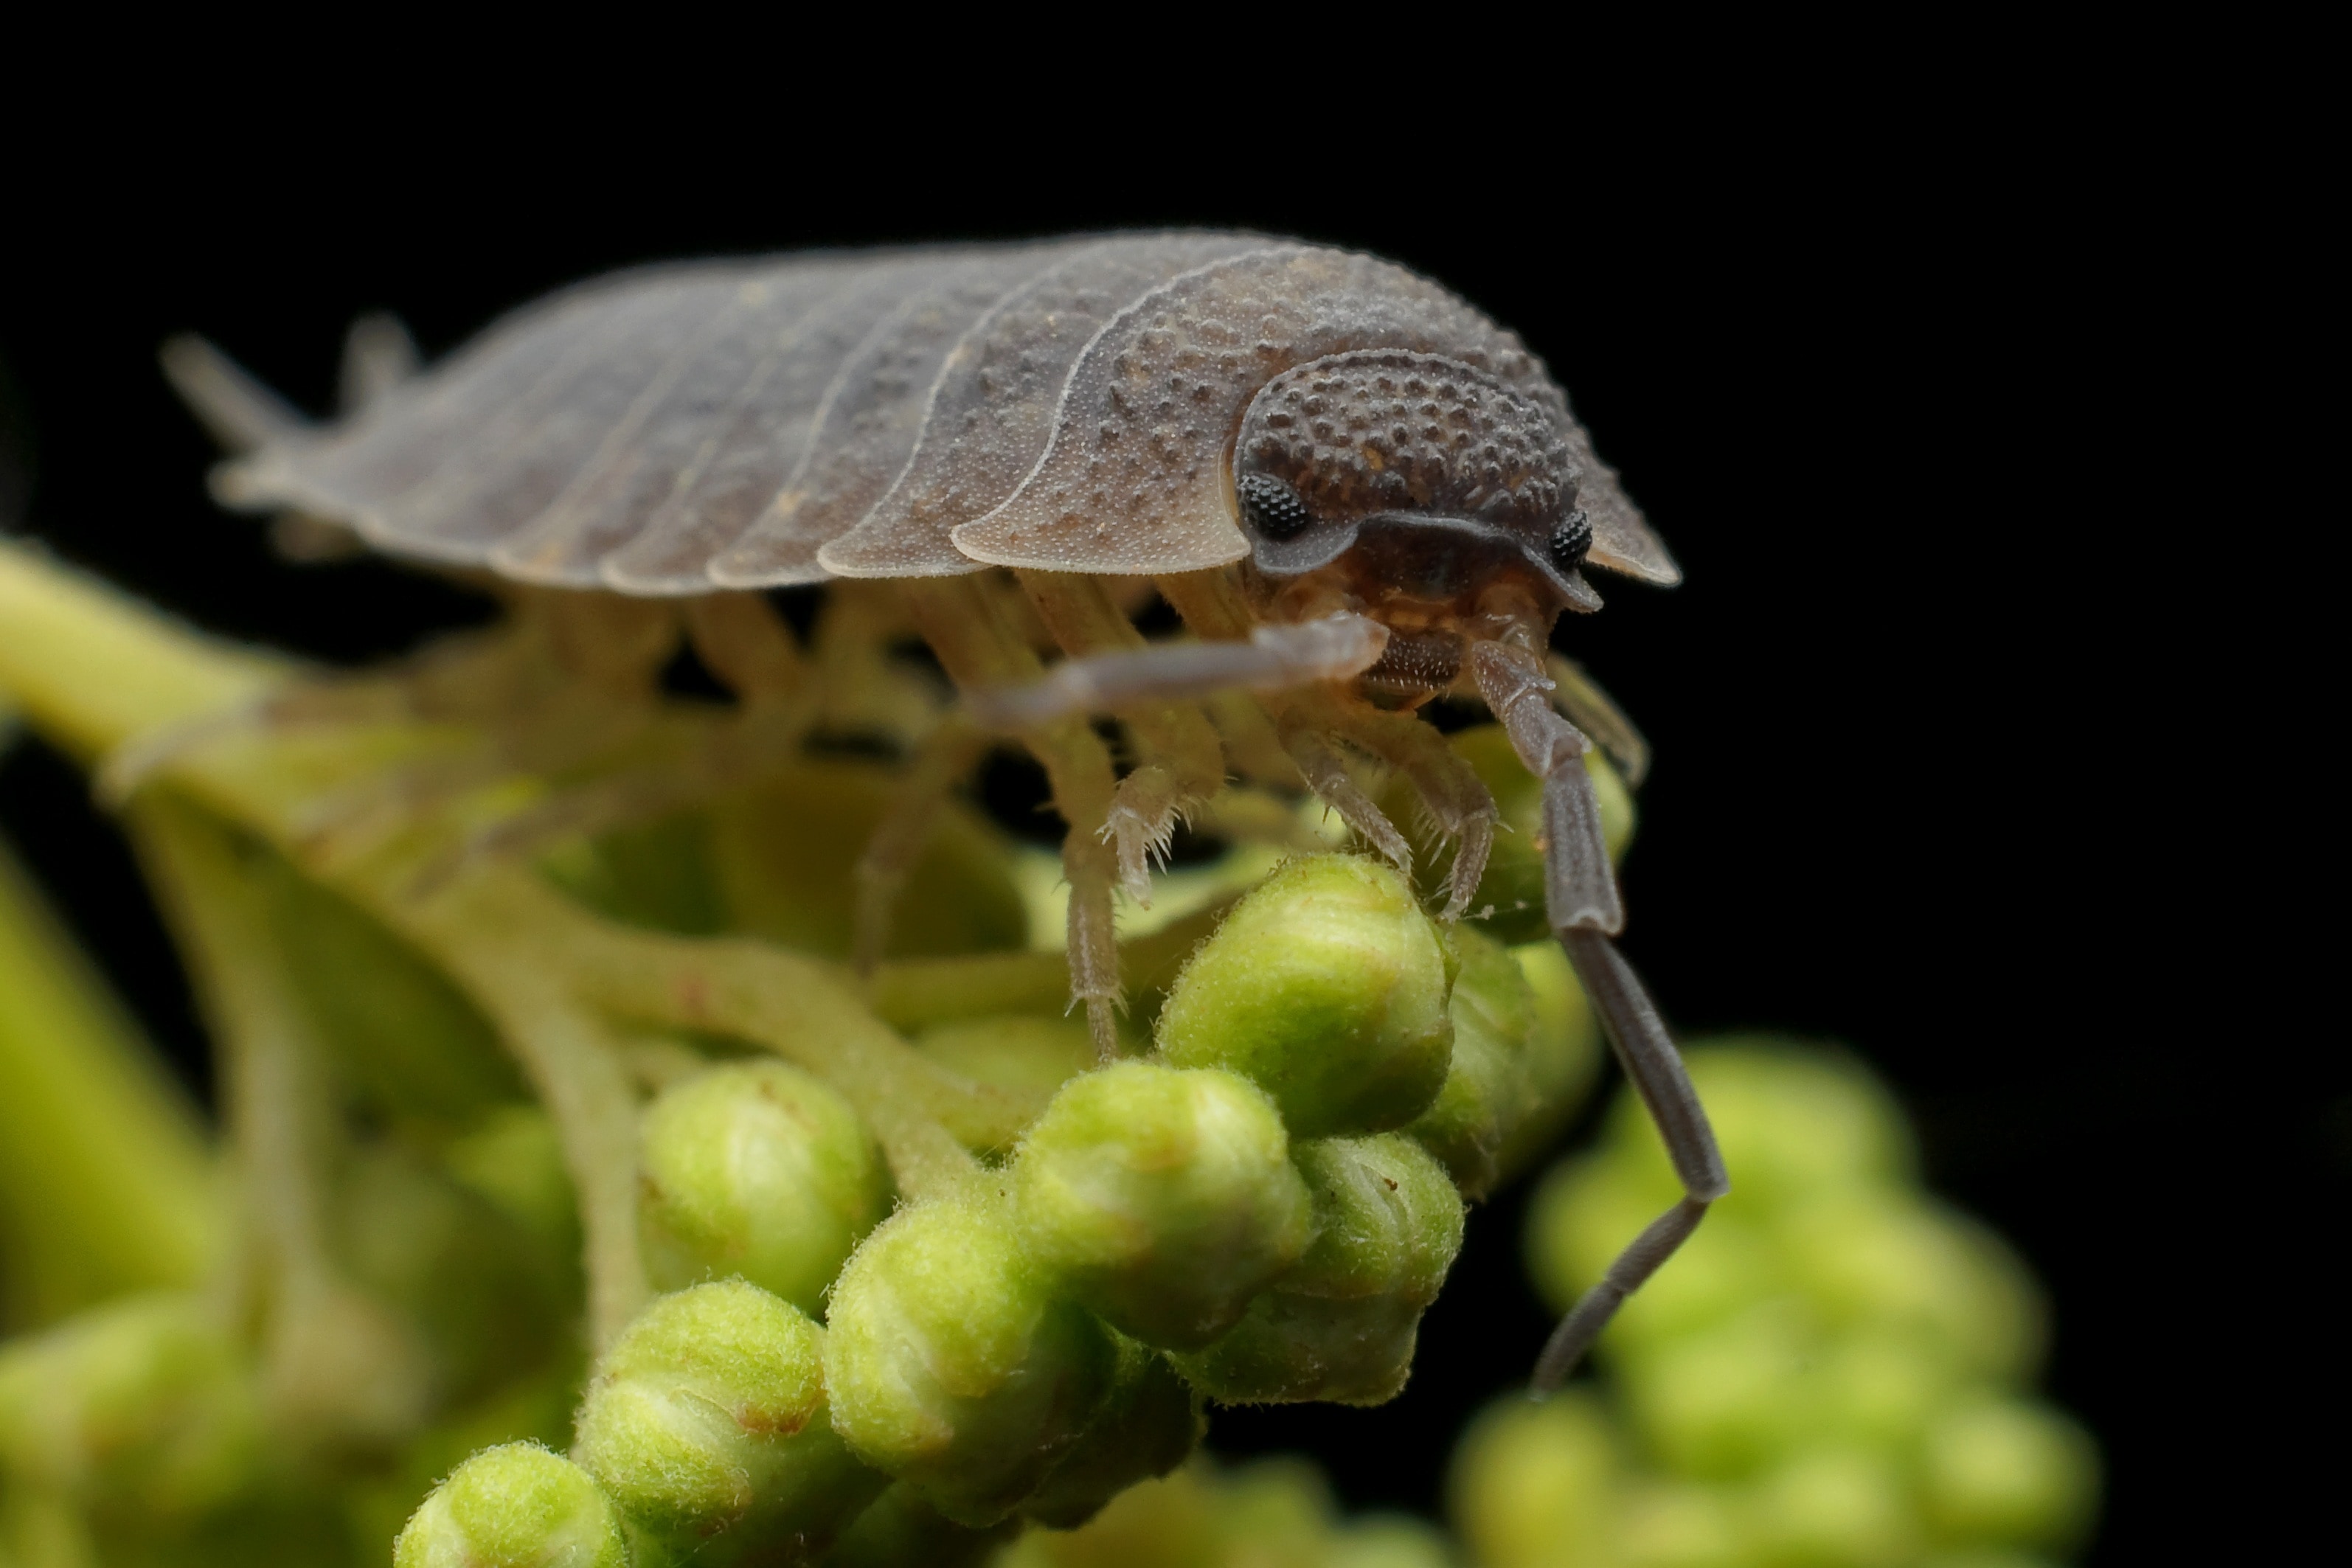 Bug, Armadillo, Insect, Worm, close-up, one animal